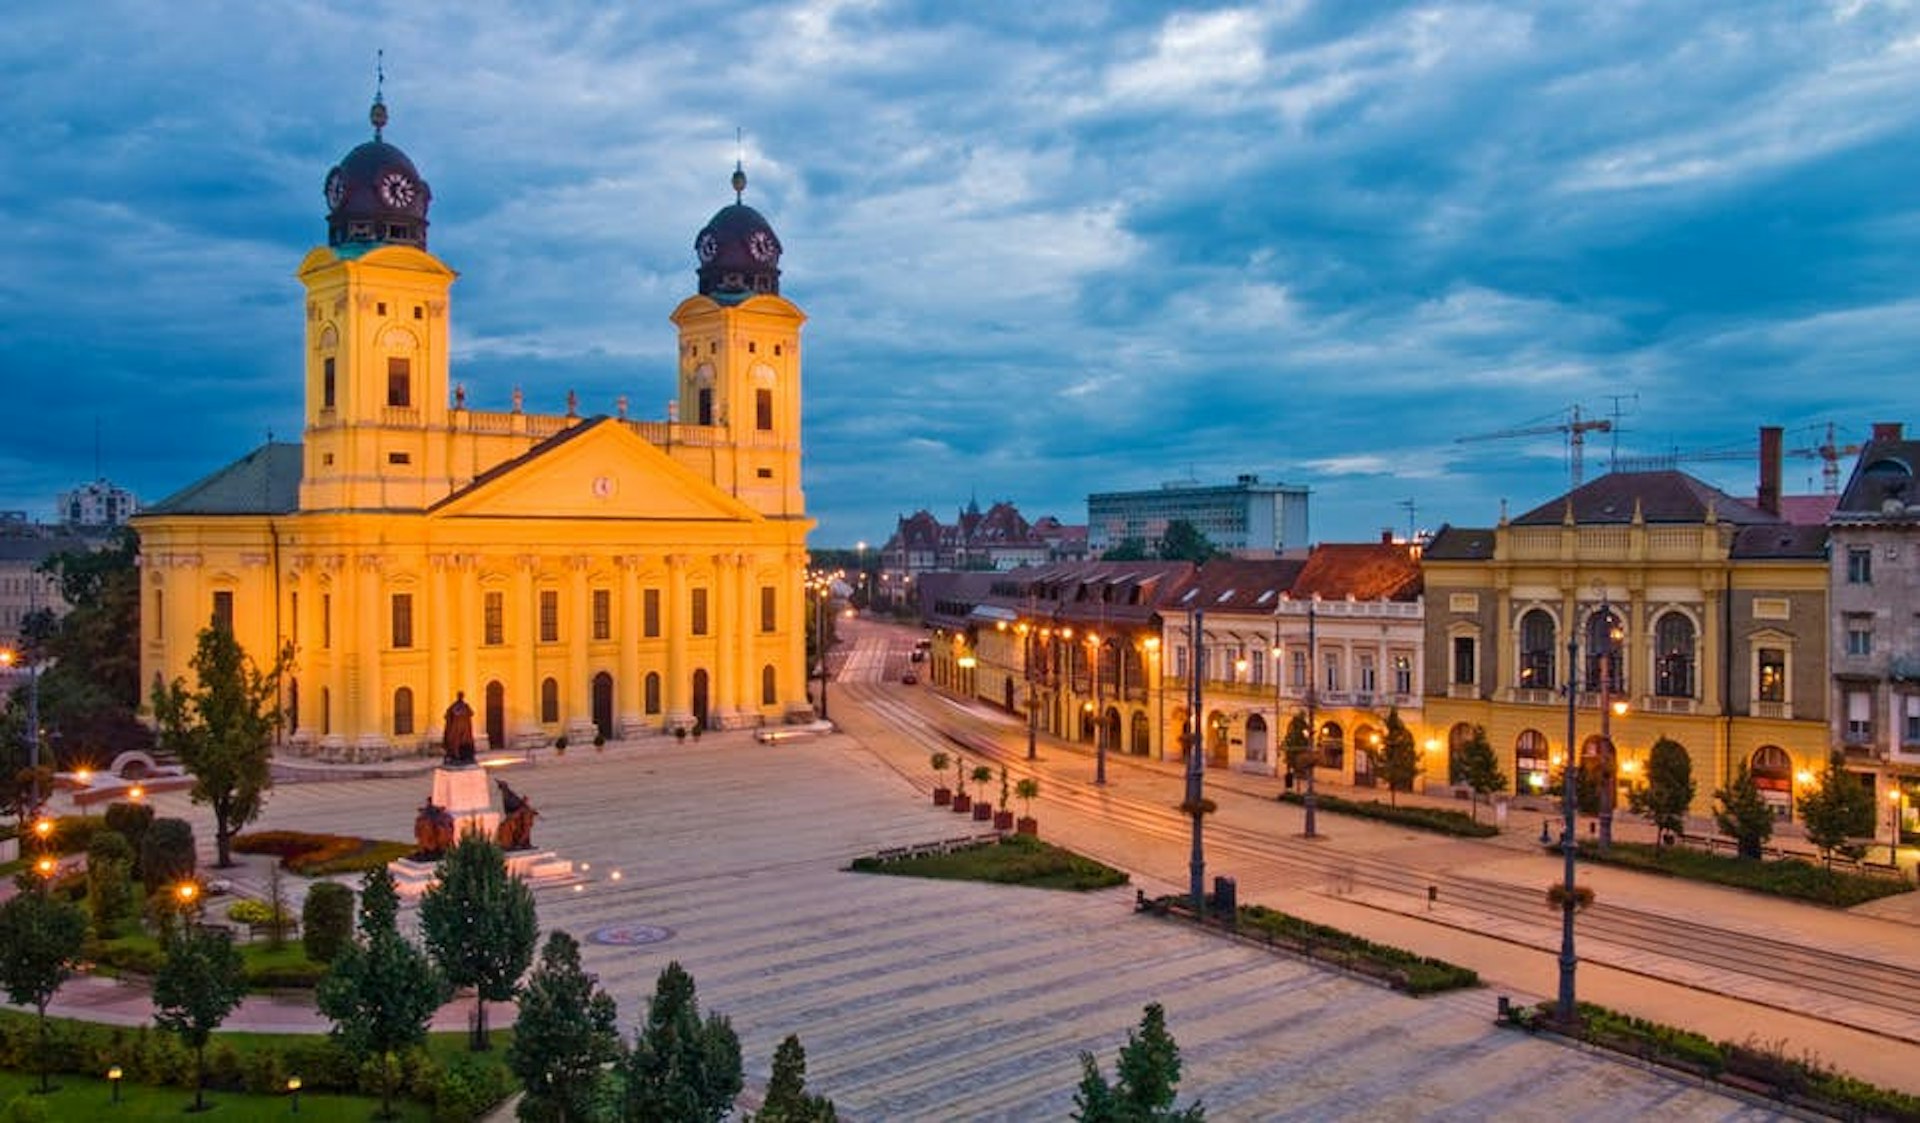 As well as a rich history, Debrecen has a growing modern-art scene and a tempting roster of festivals @ AndreyGatash / Getty Images